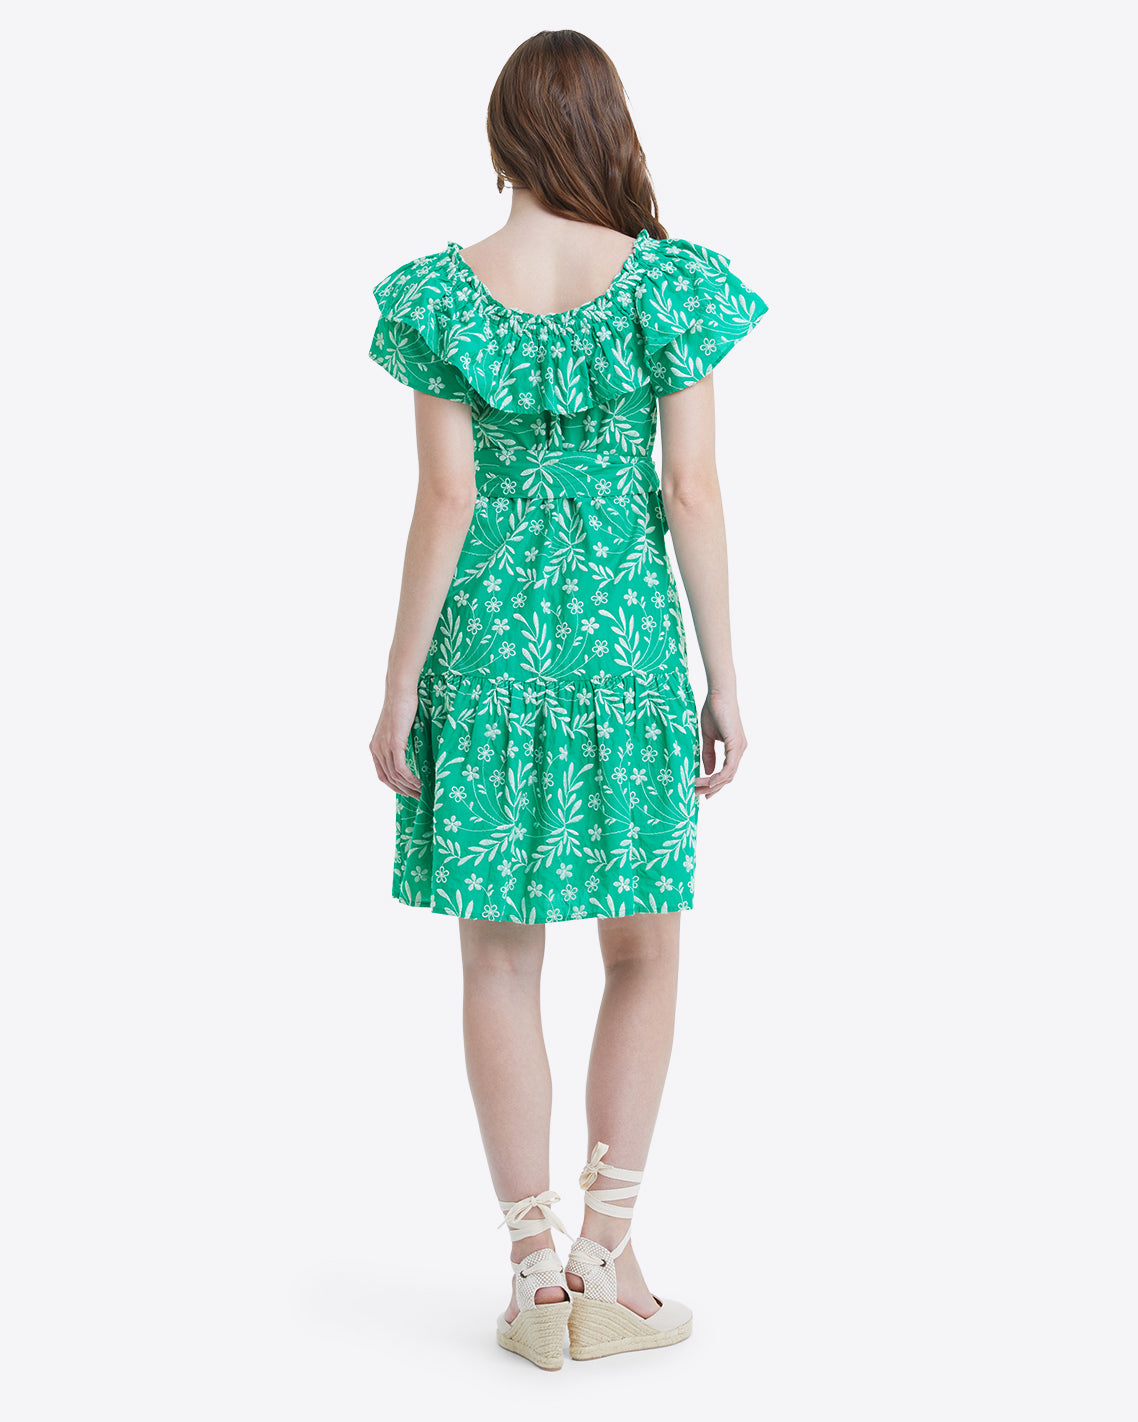 Sawyer Dress in Embroidered Floral